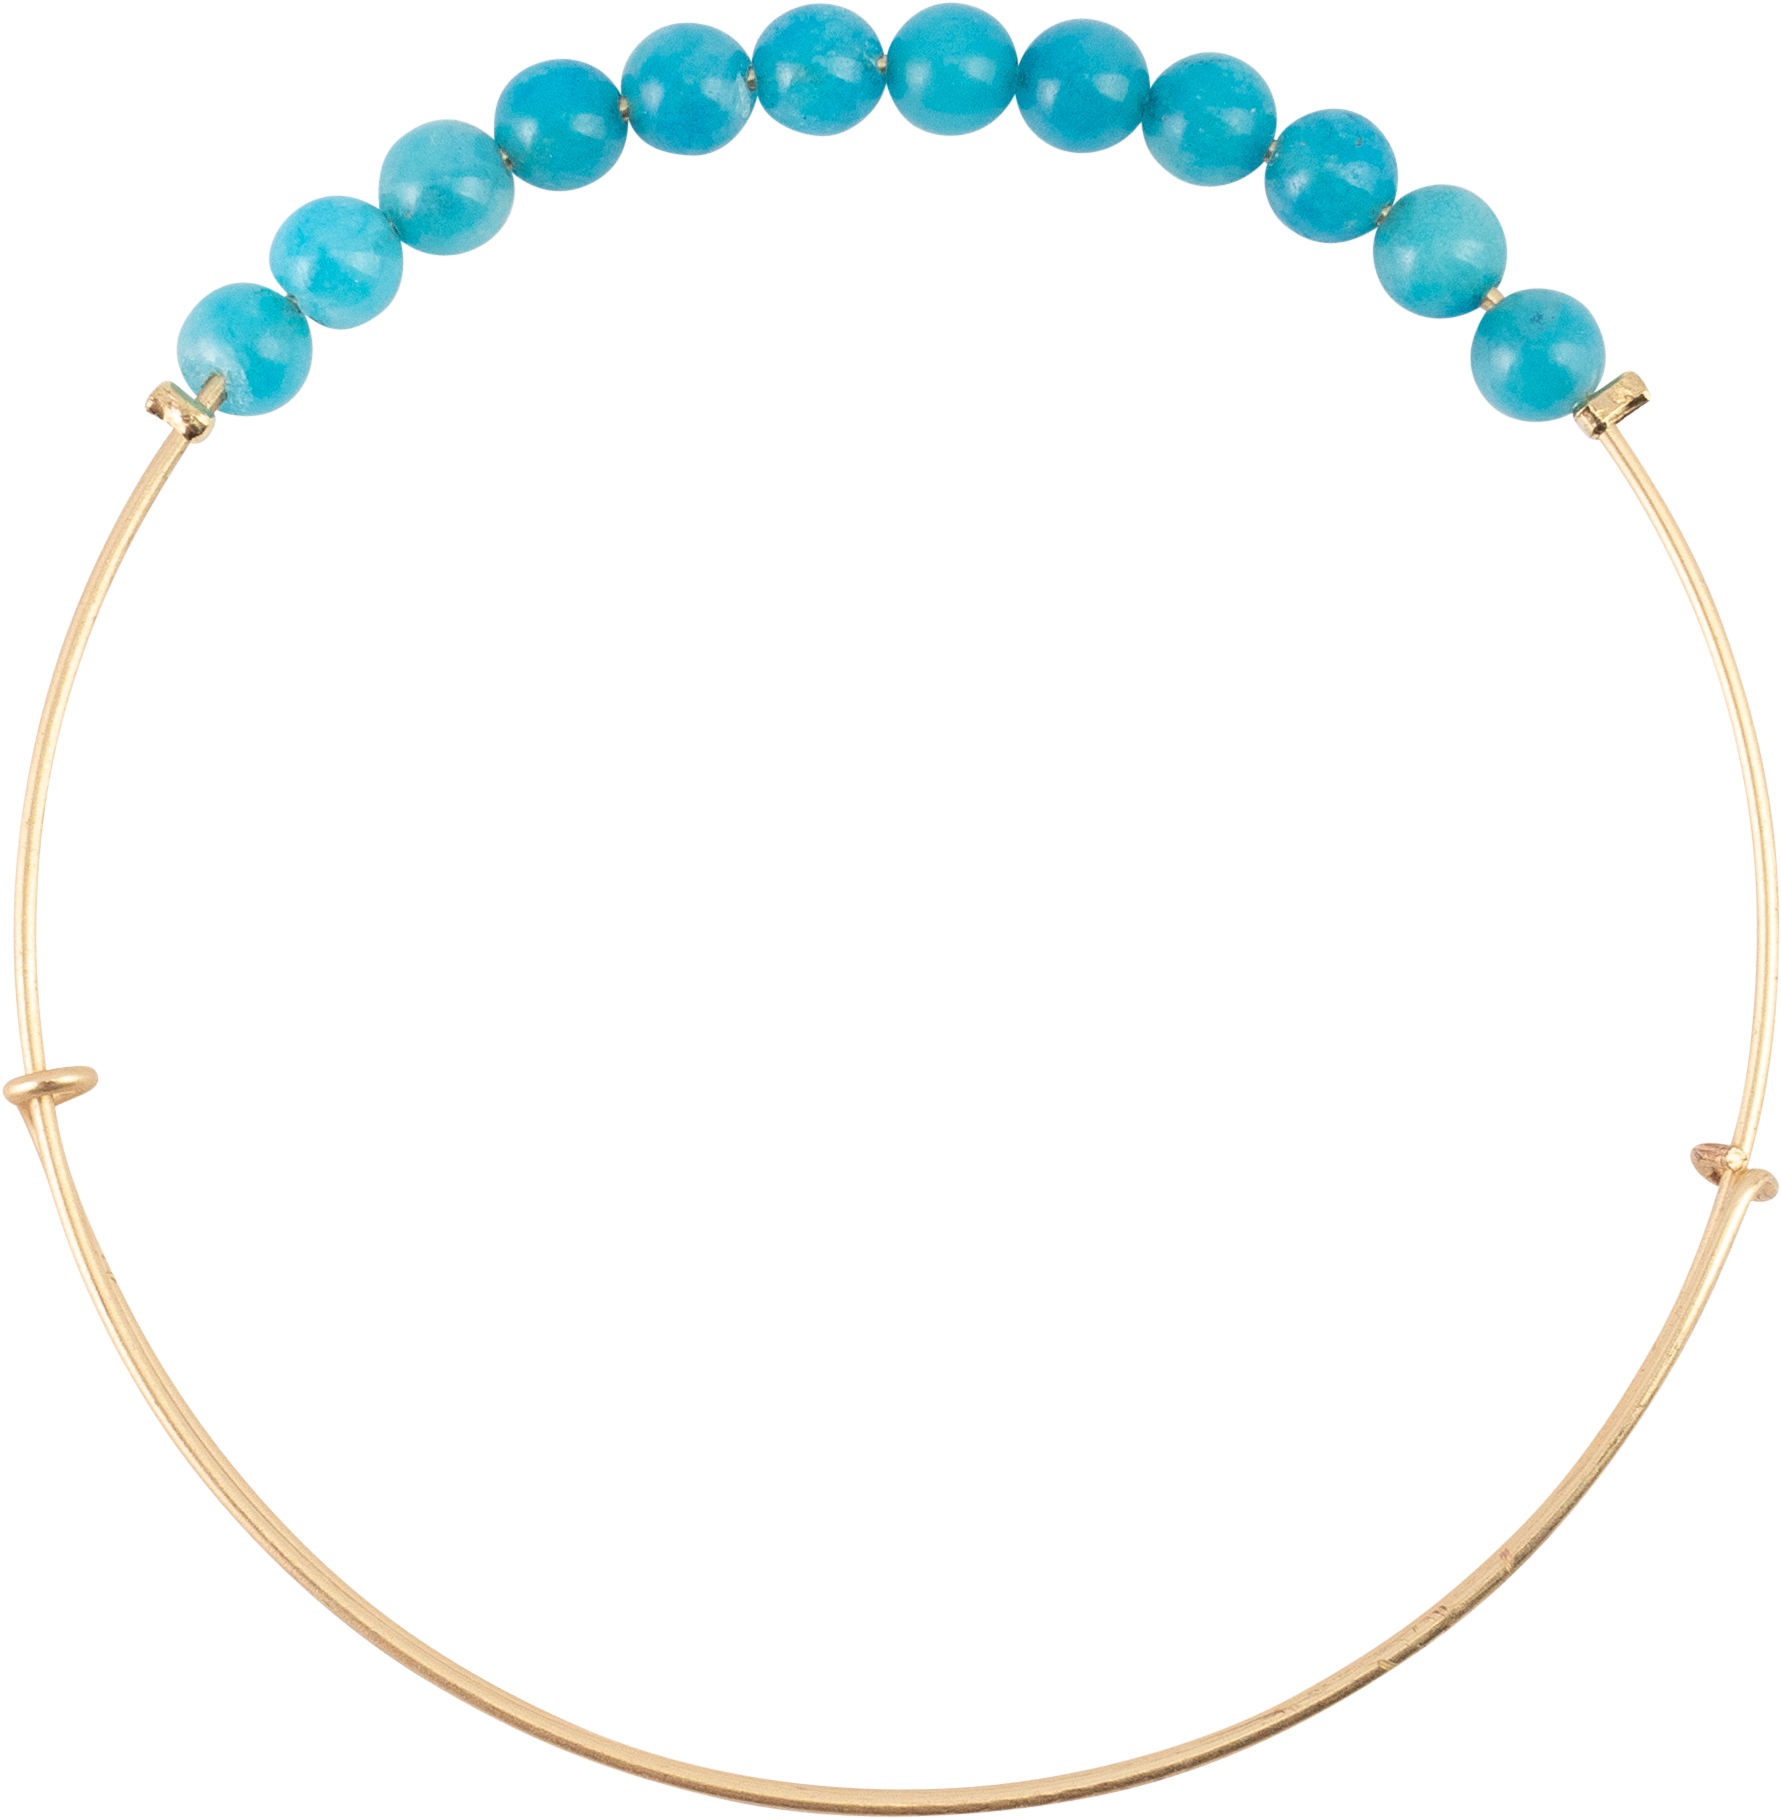 A Blue Beaded Necklace